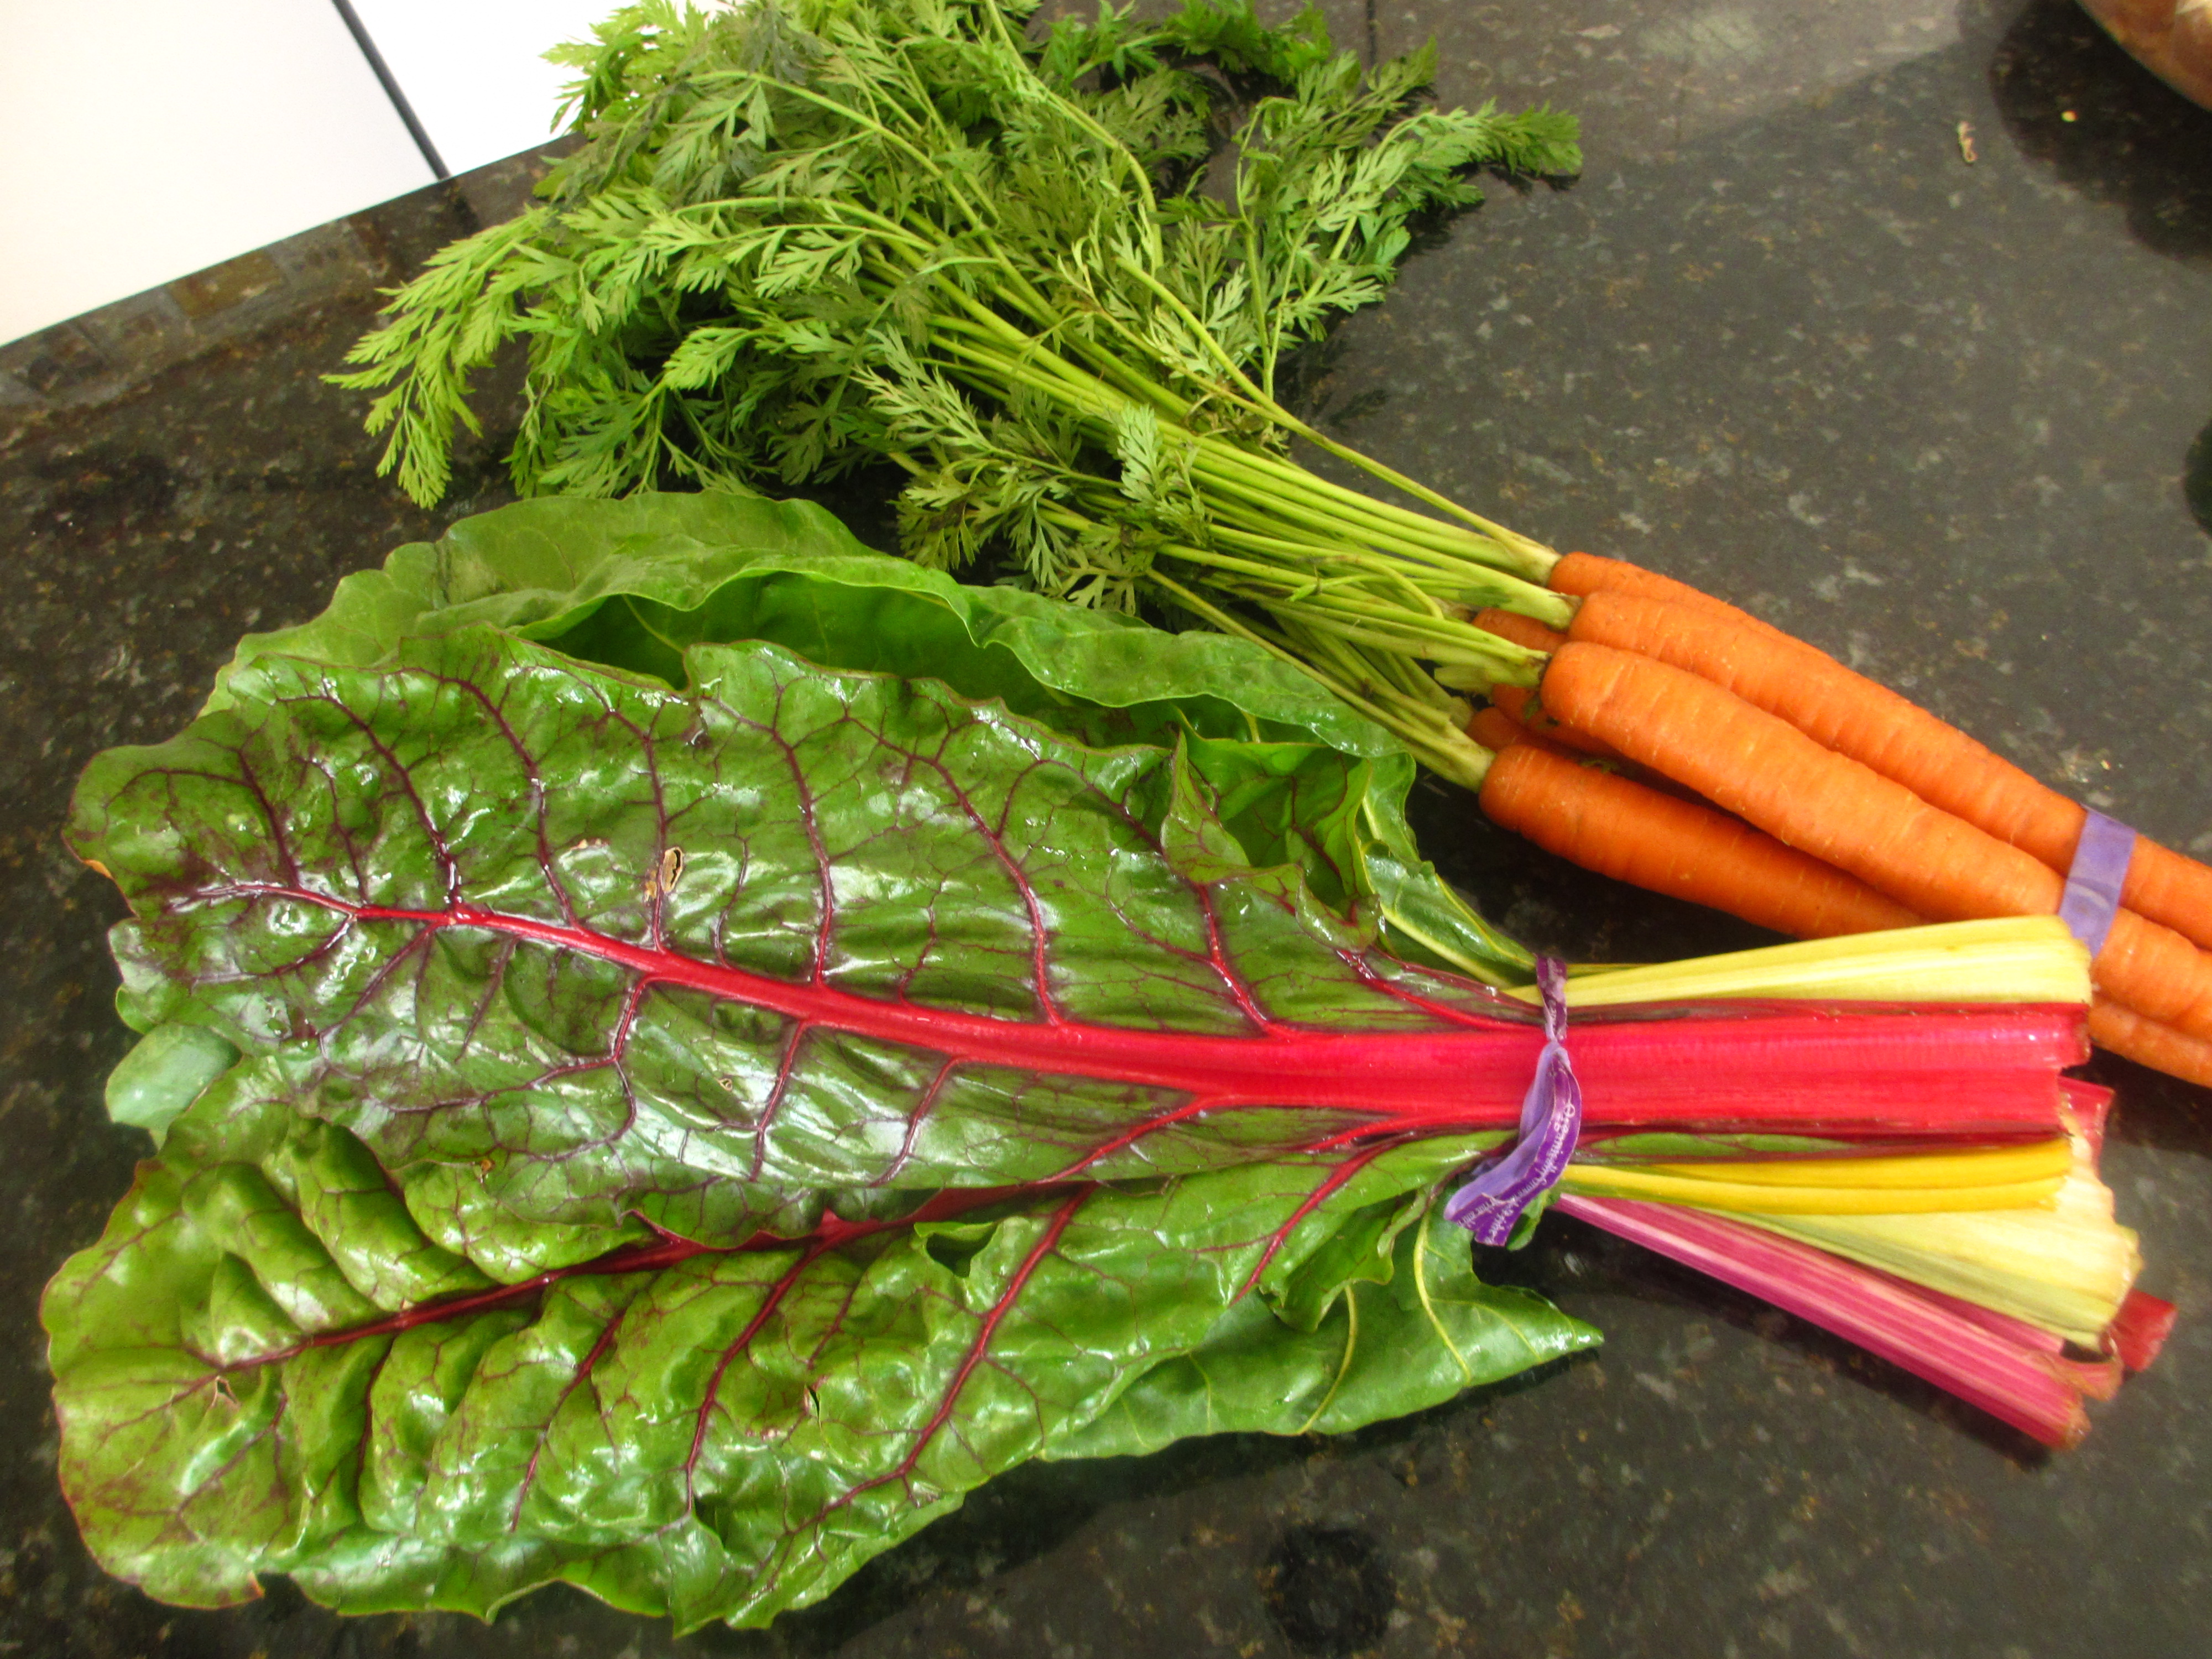 Swiss chard and carrots